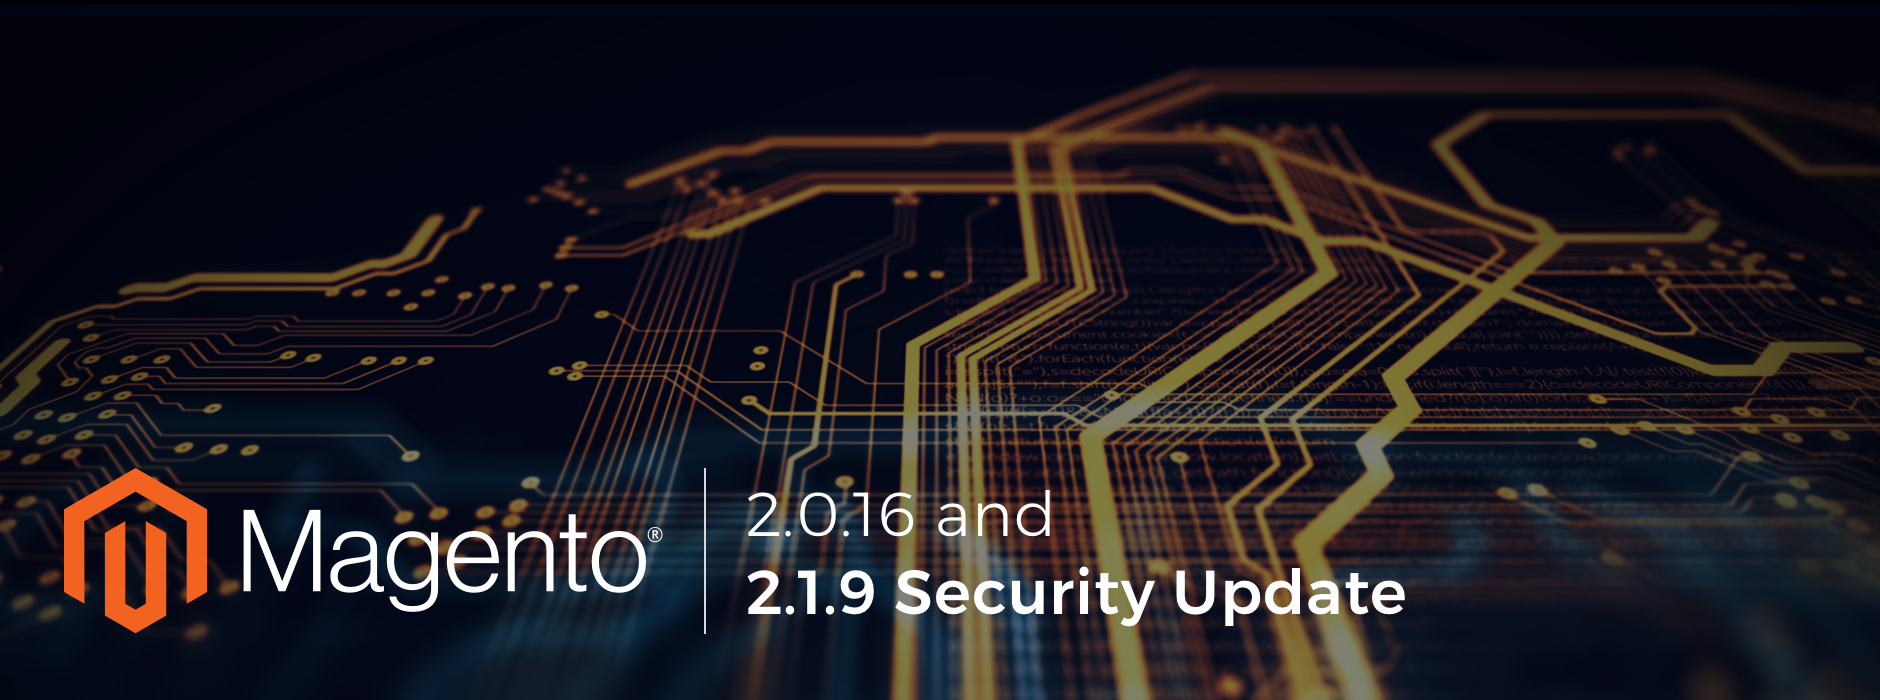 2.0.16 and 2.1.9 Security Update